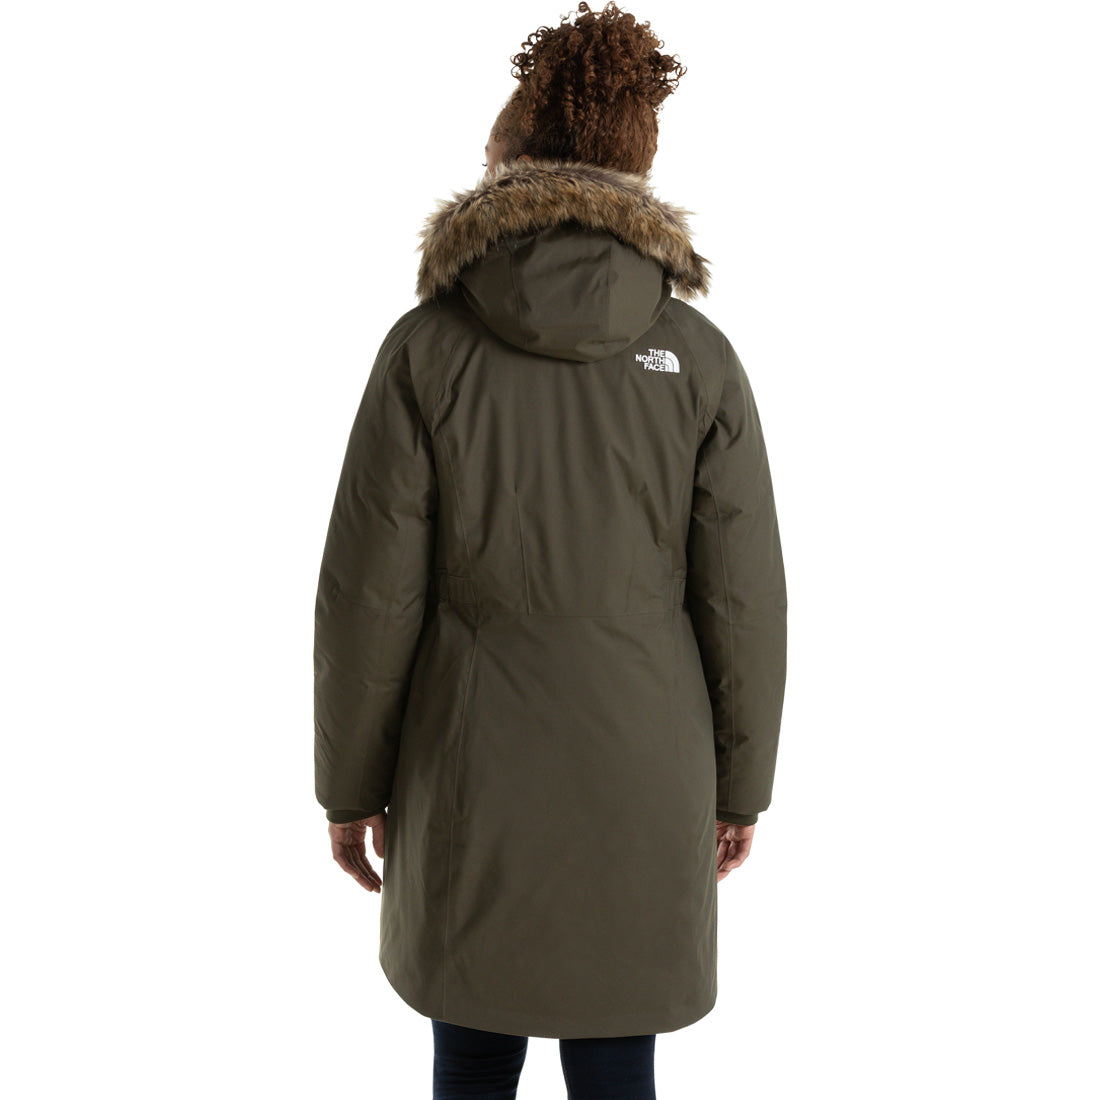 The North Face Jump Down Parka - Women's